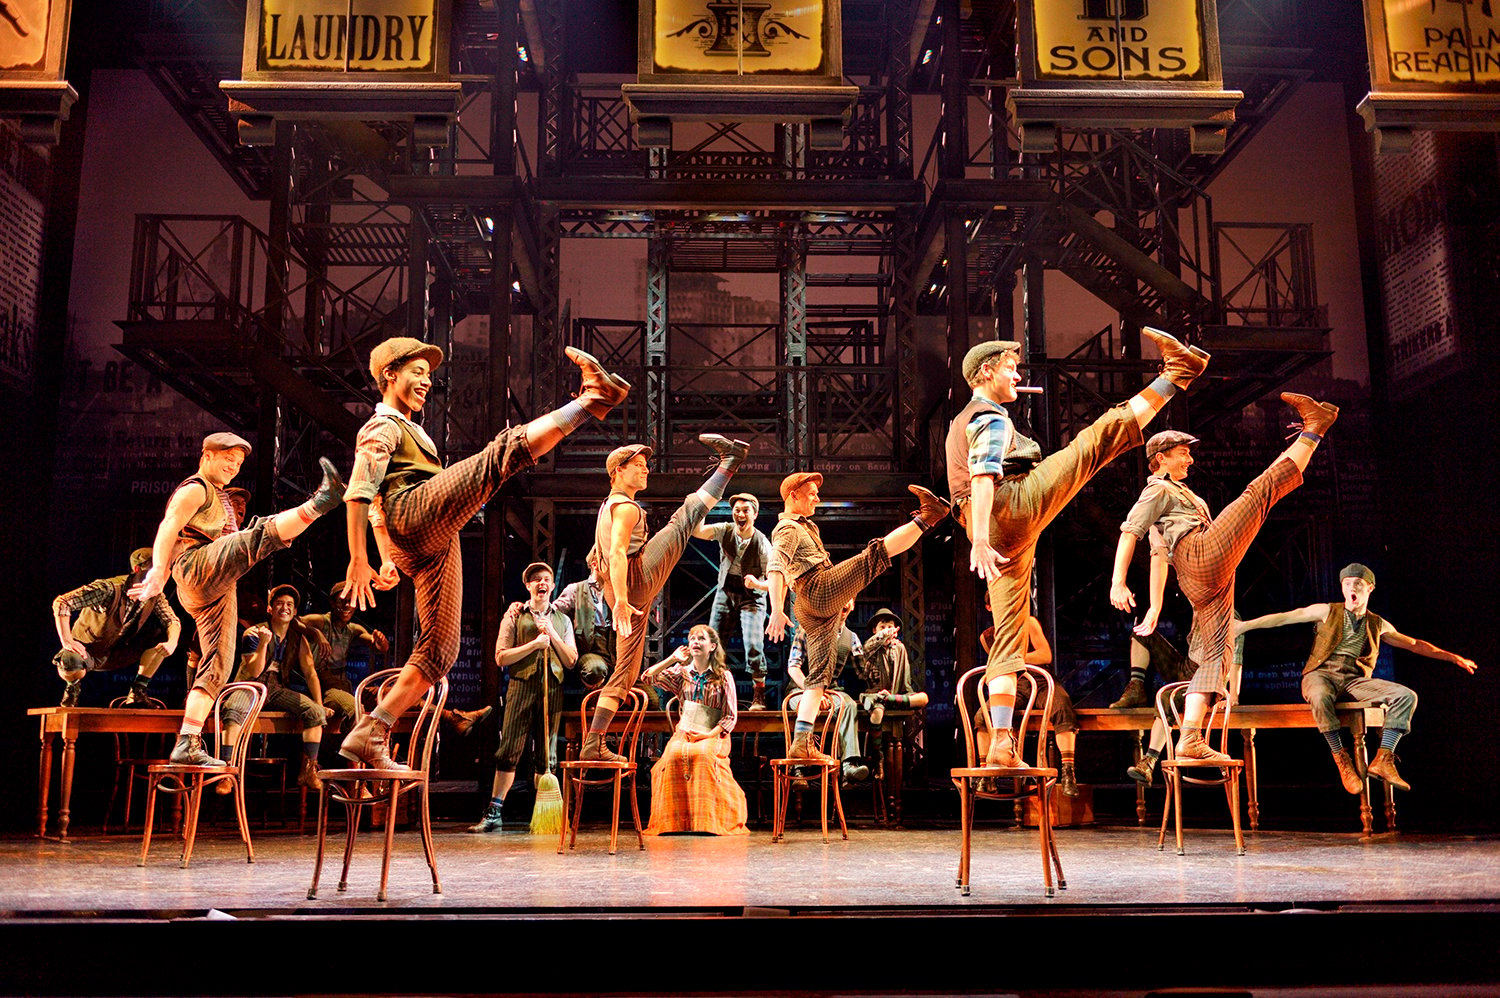 Newsies Takes Over The Winspear With A New Female Character Art Seek Arts Music Culture For North Texas